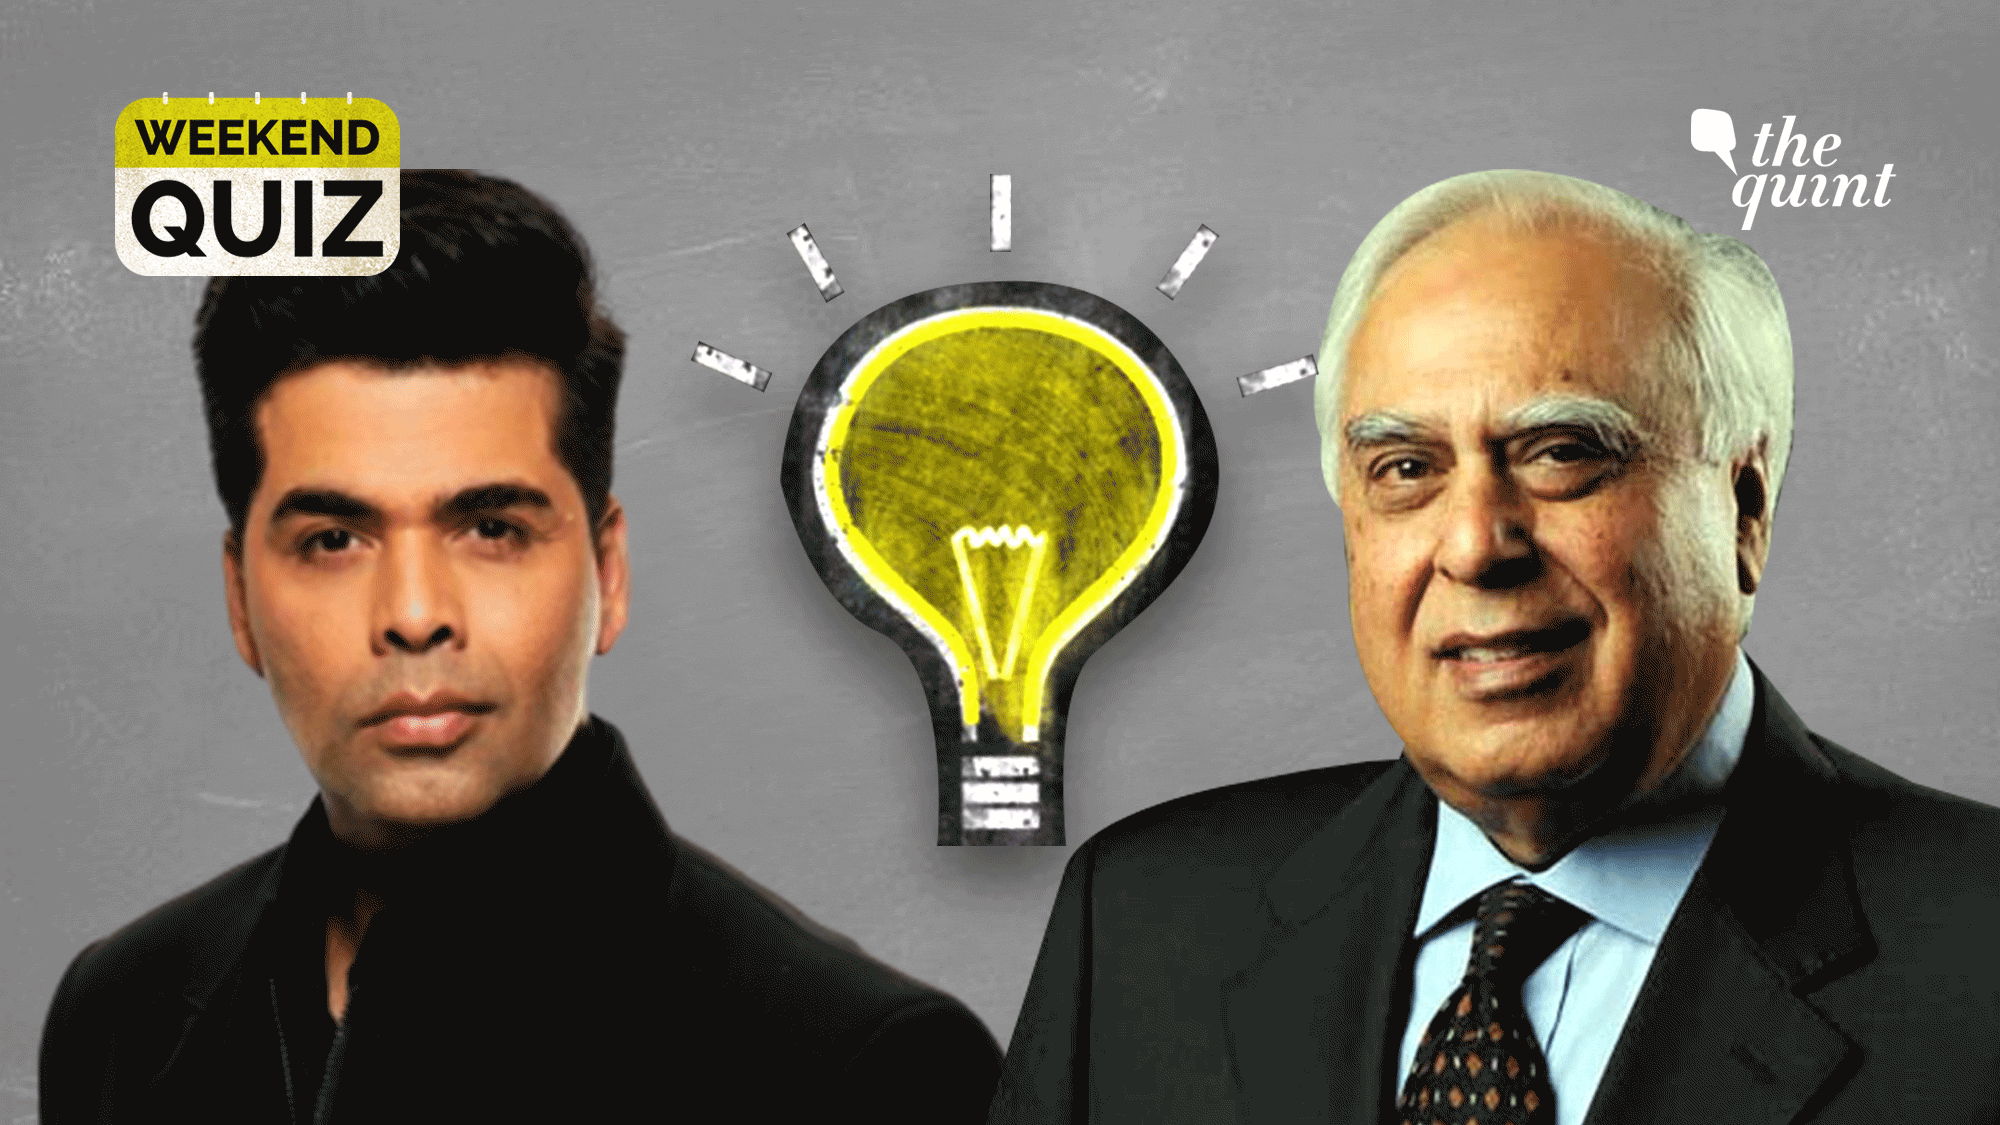 <div class="paragraphs"><p>From Kapil Sibal's resignation to Karan Johar's birthday bash, have you been tracking the news this week?</p></div>